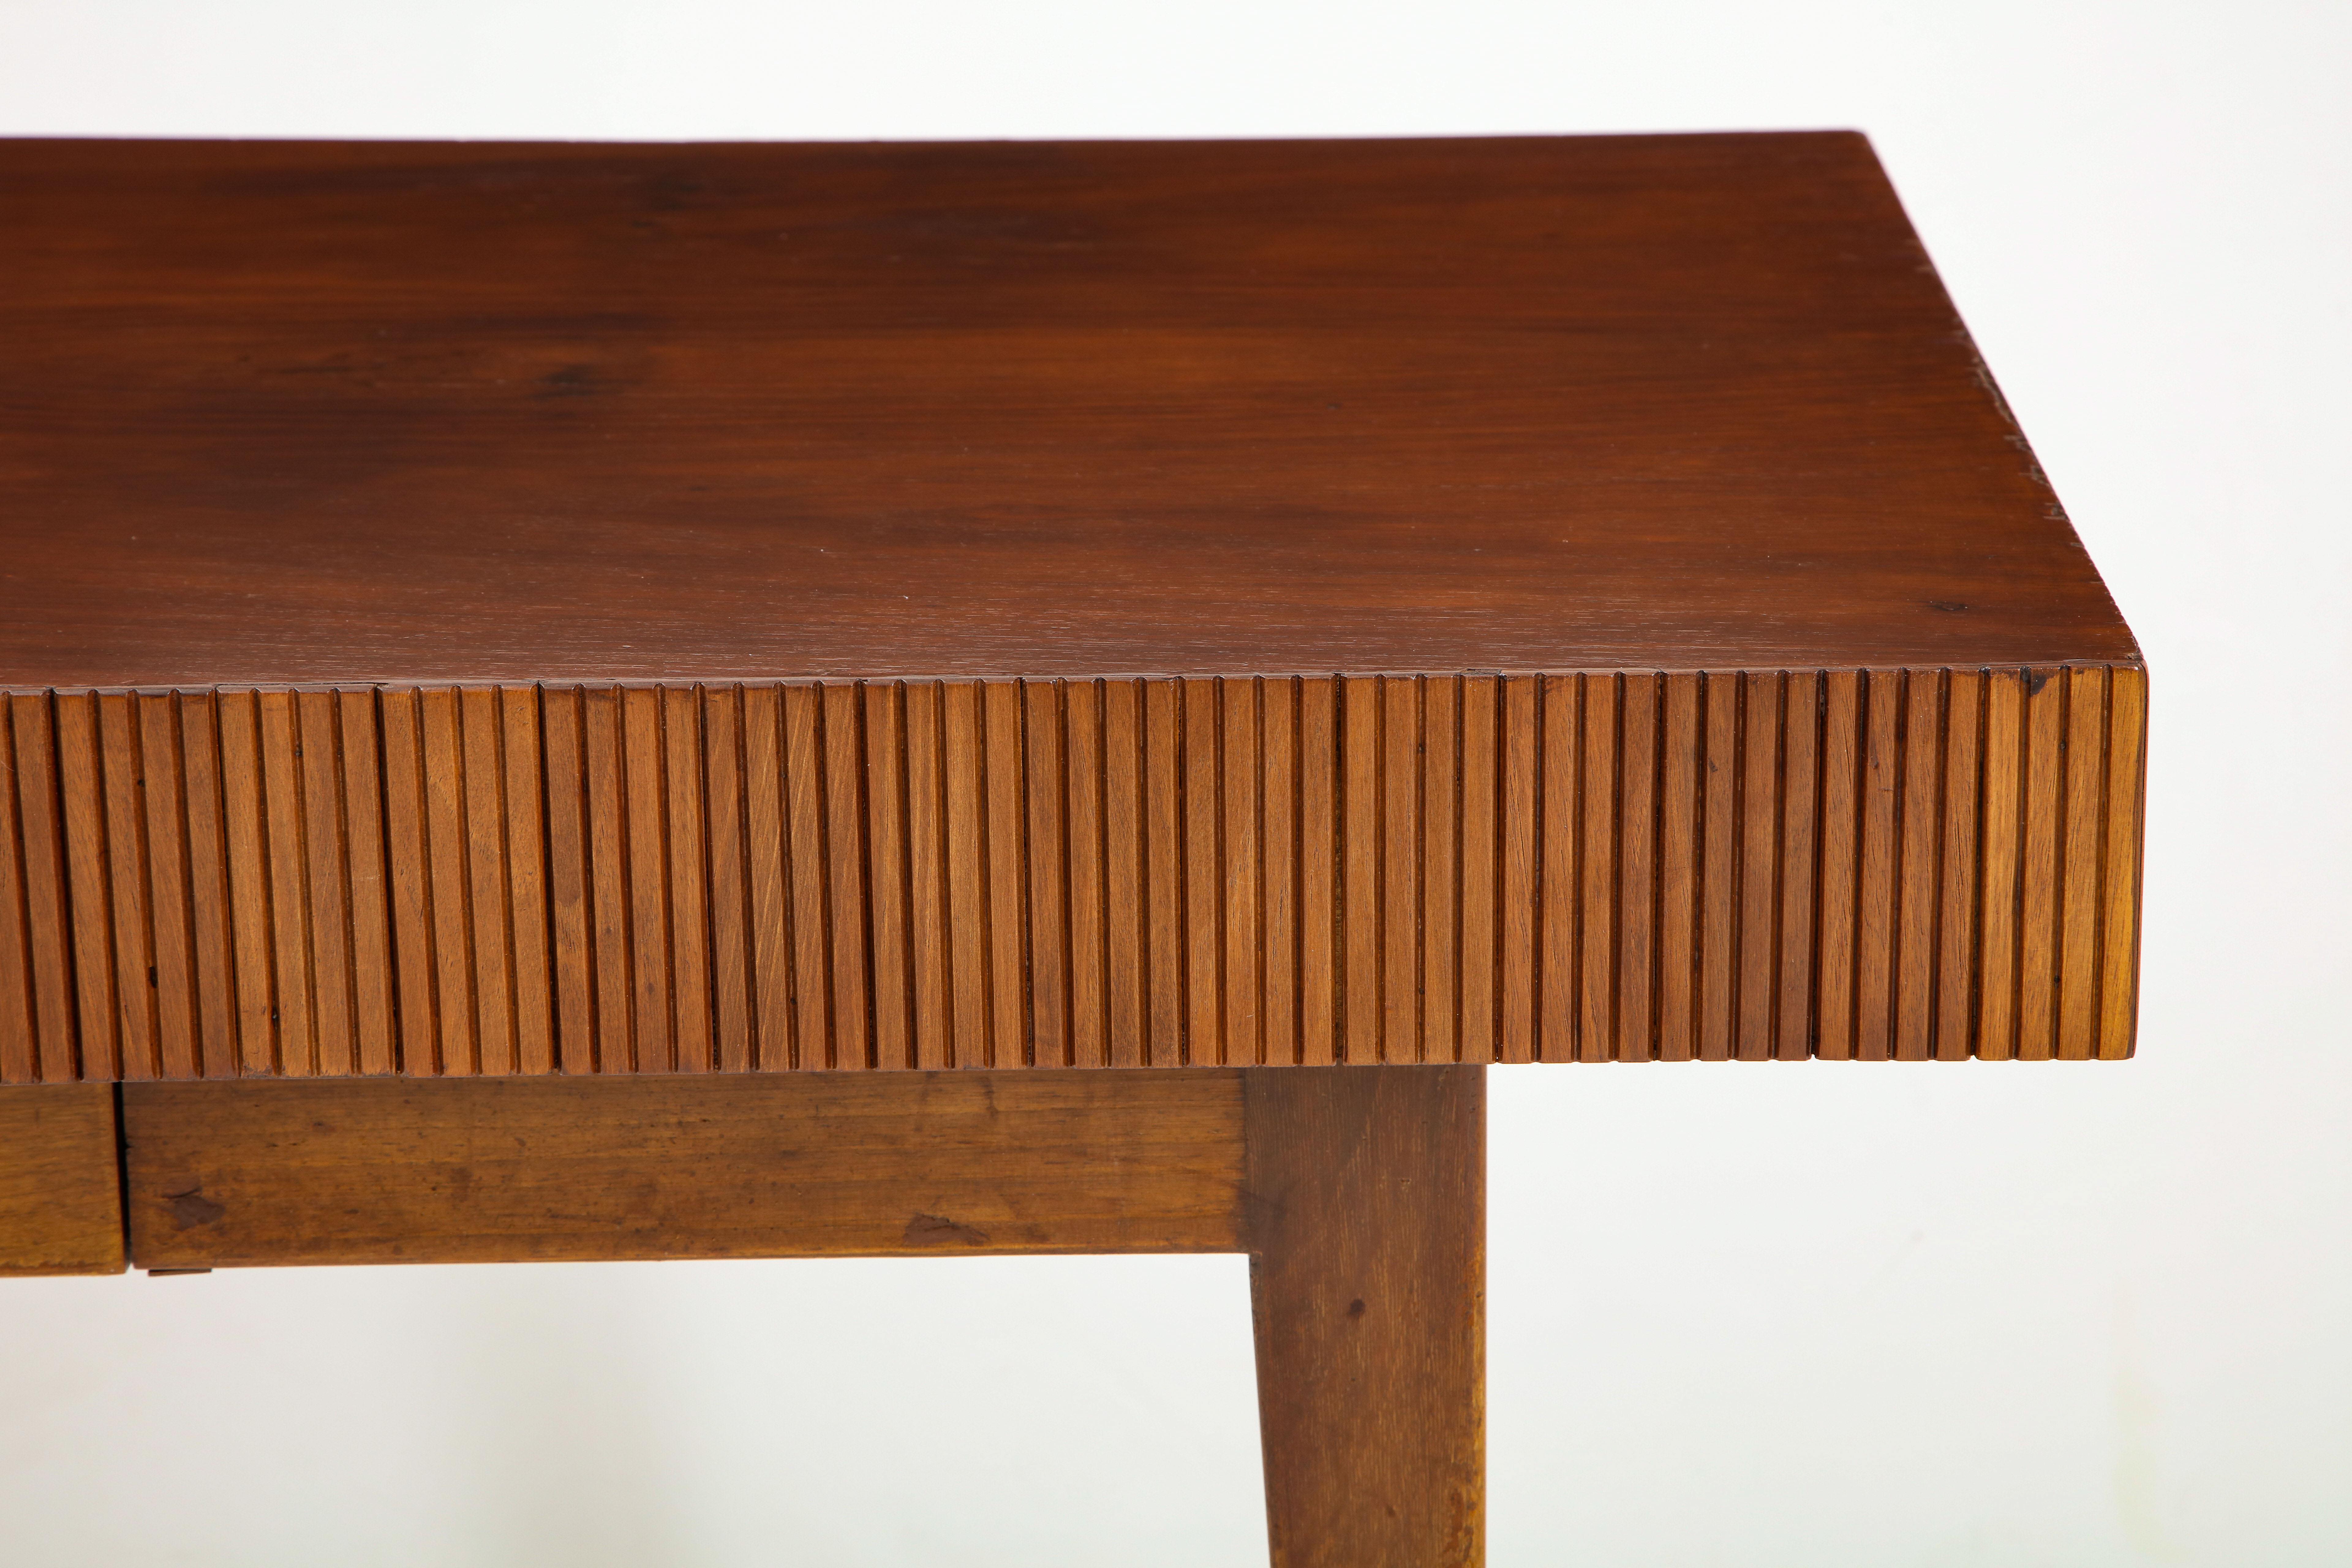 Italian Walnut Table with Single Drawer and Tapered Legs, Style of Gio Ponti (Italienisch)